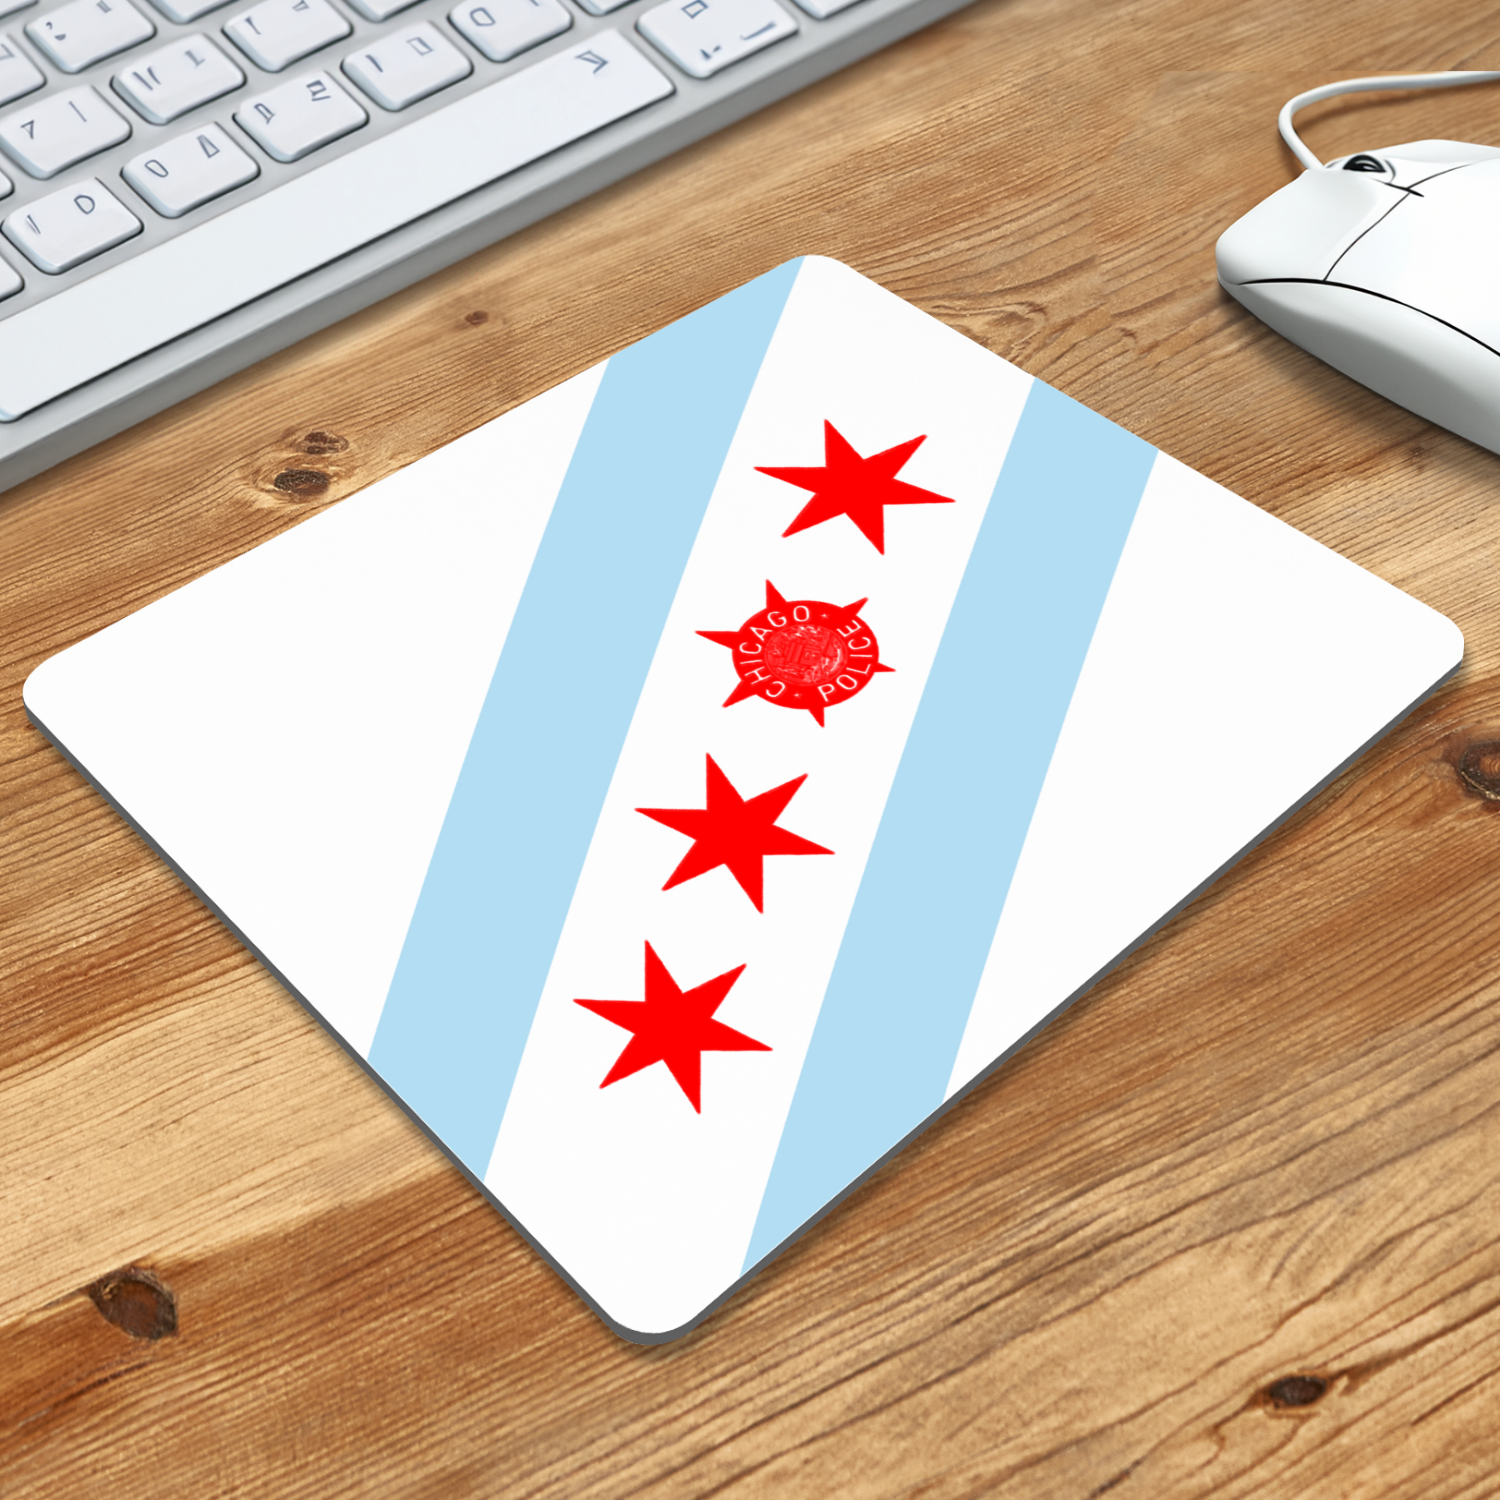 Chicago PD Flag Mouse Pad